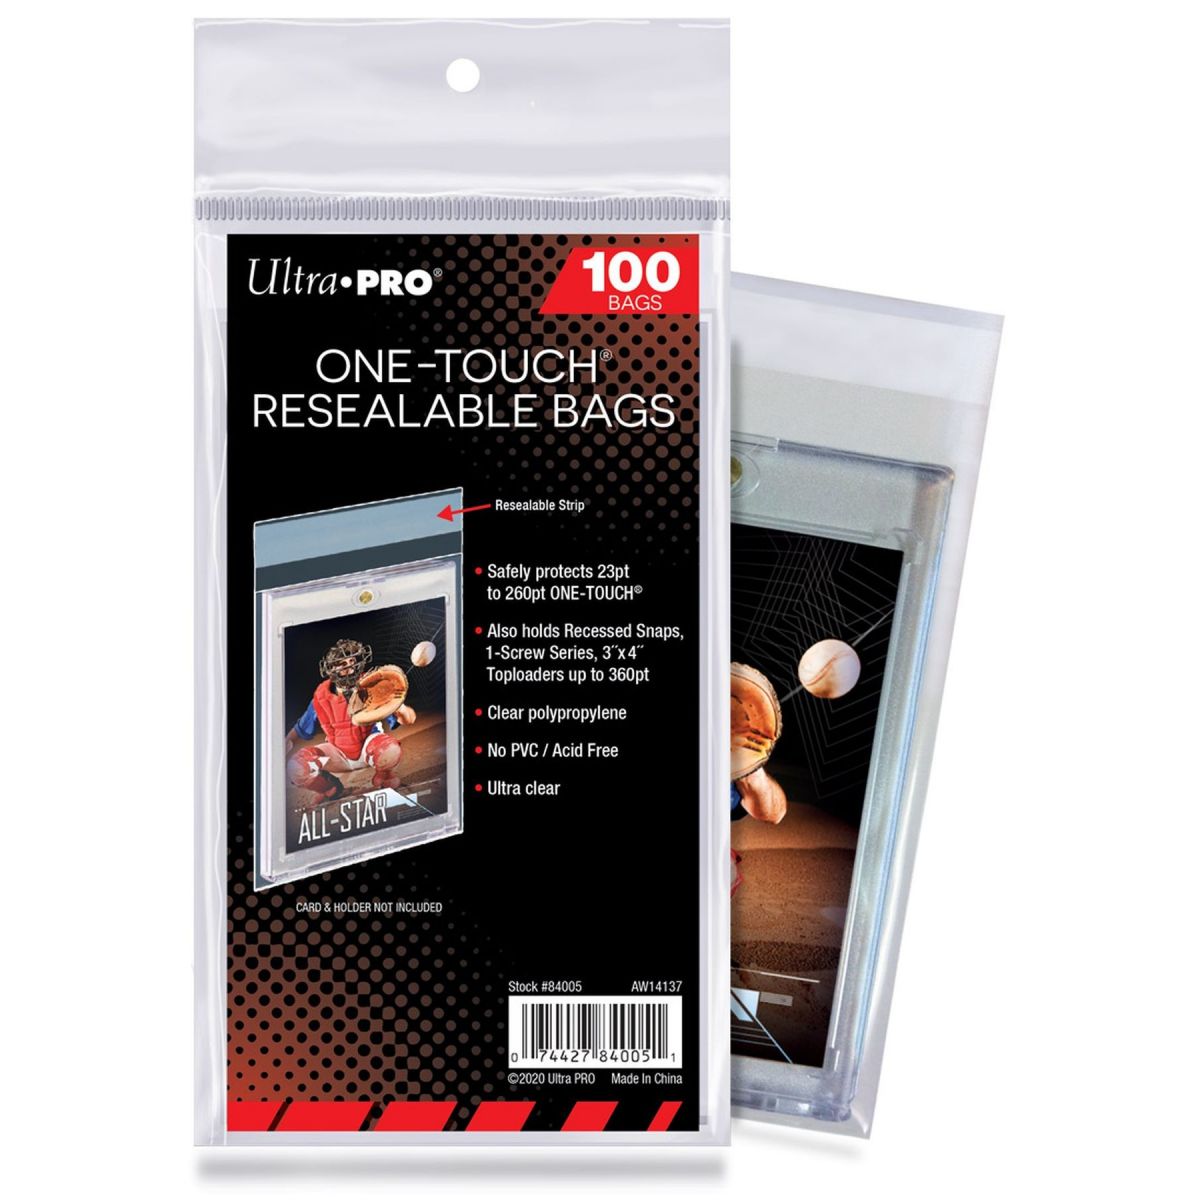 Item Ultra Pro - Team Bags - One-Touch Resealable Bag - One-Touch Resealable Card Protectors (100)